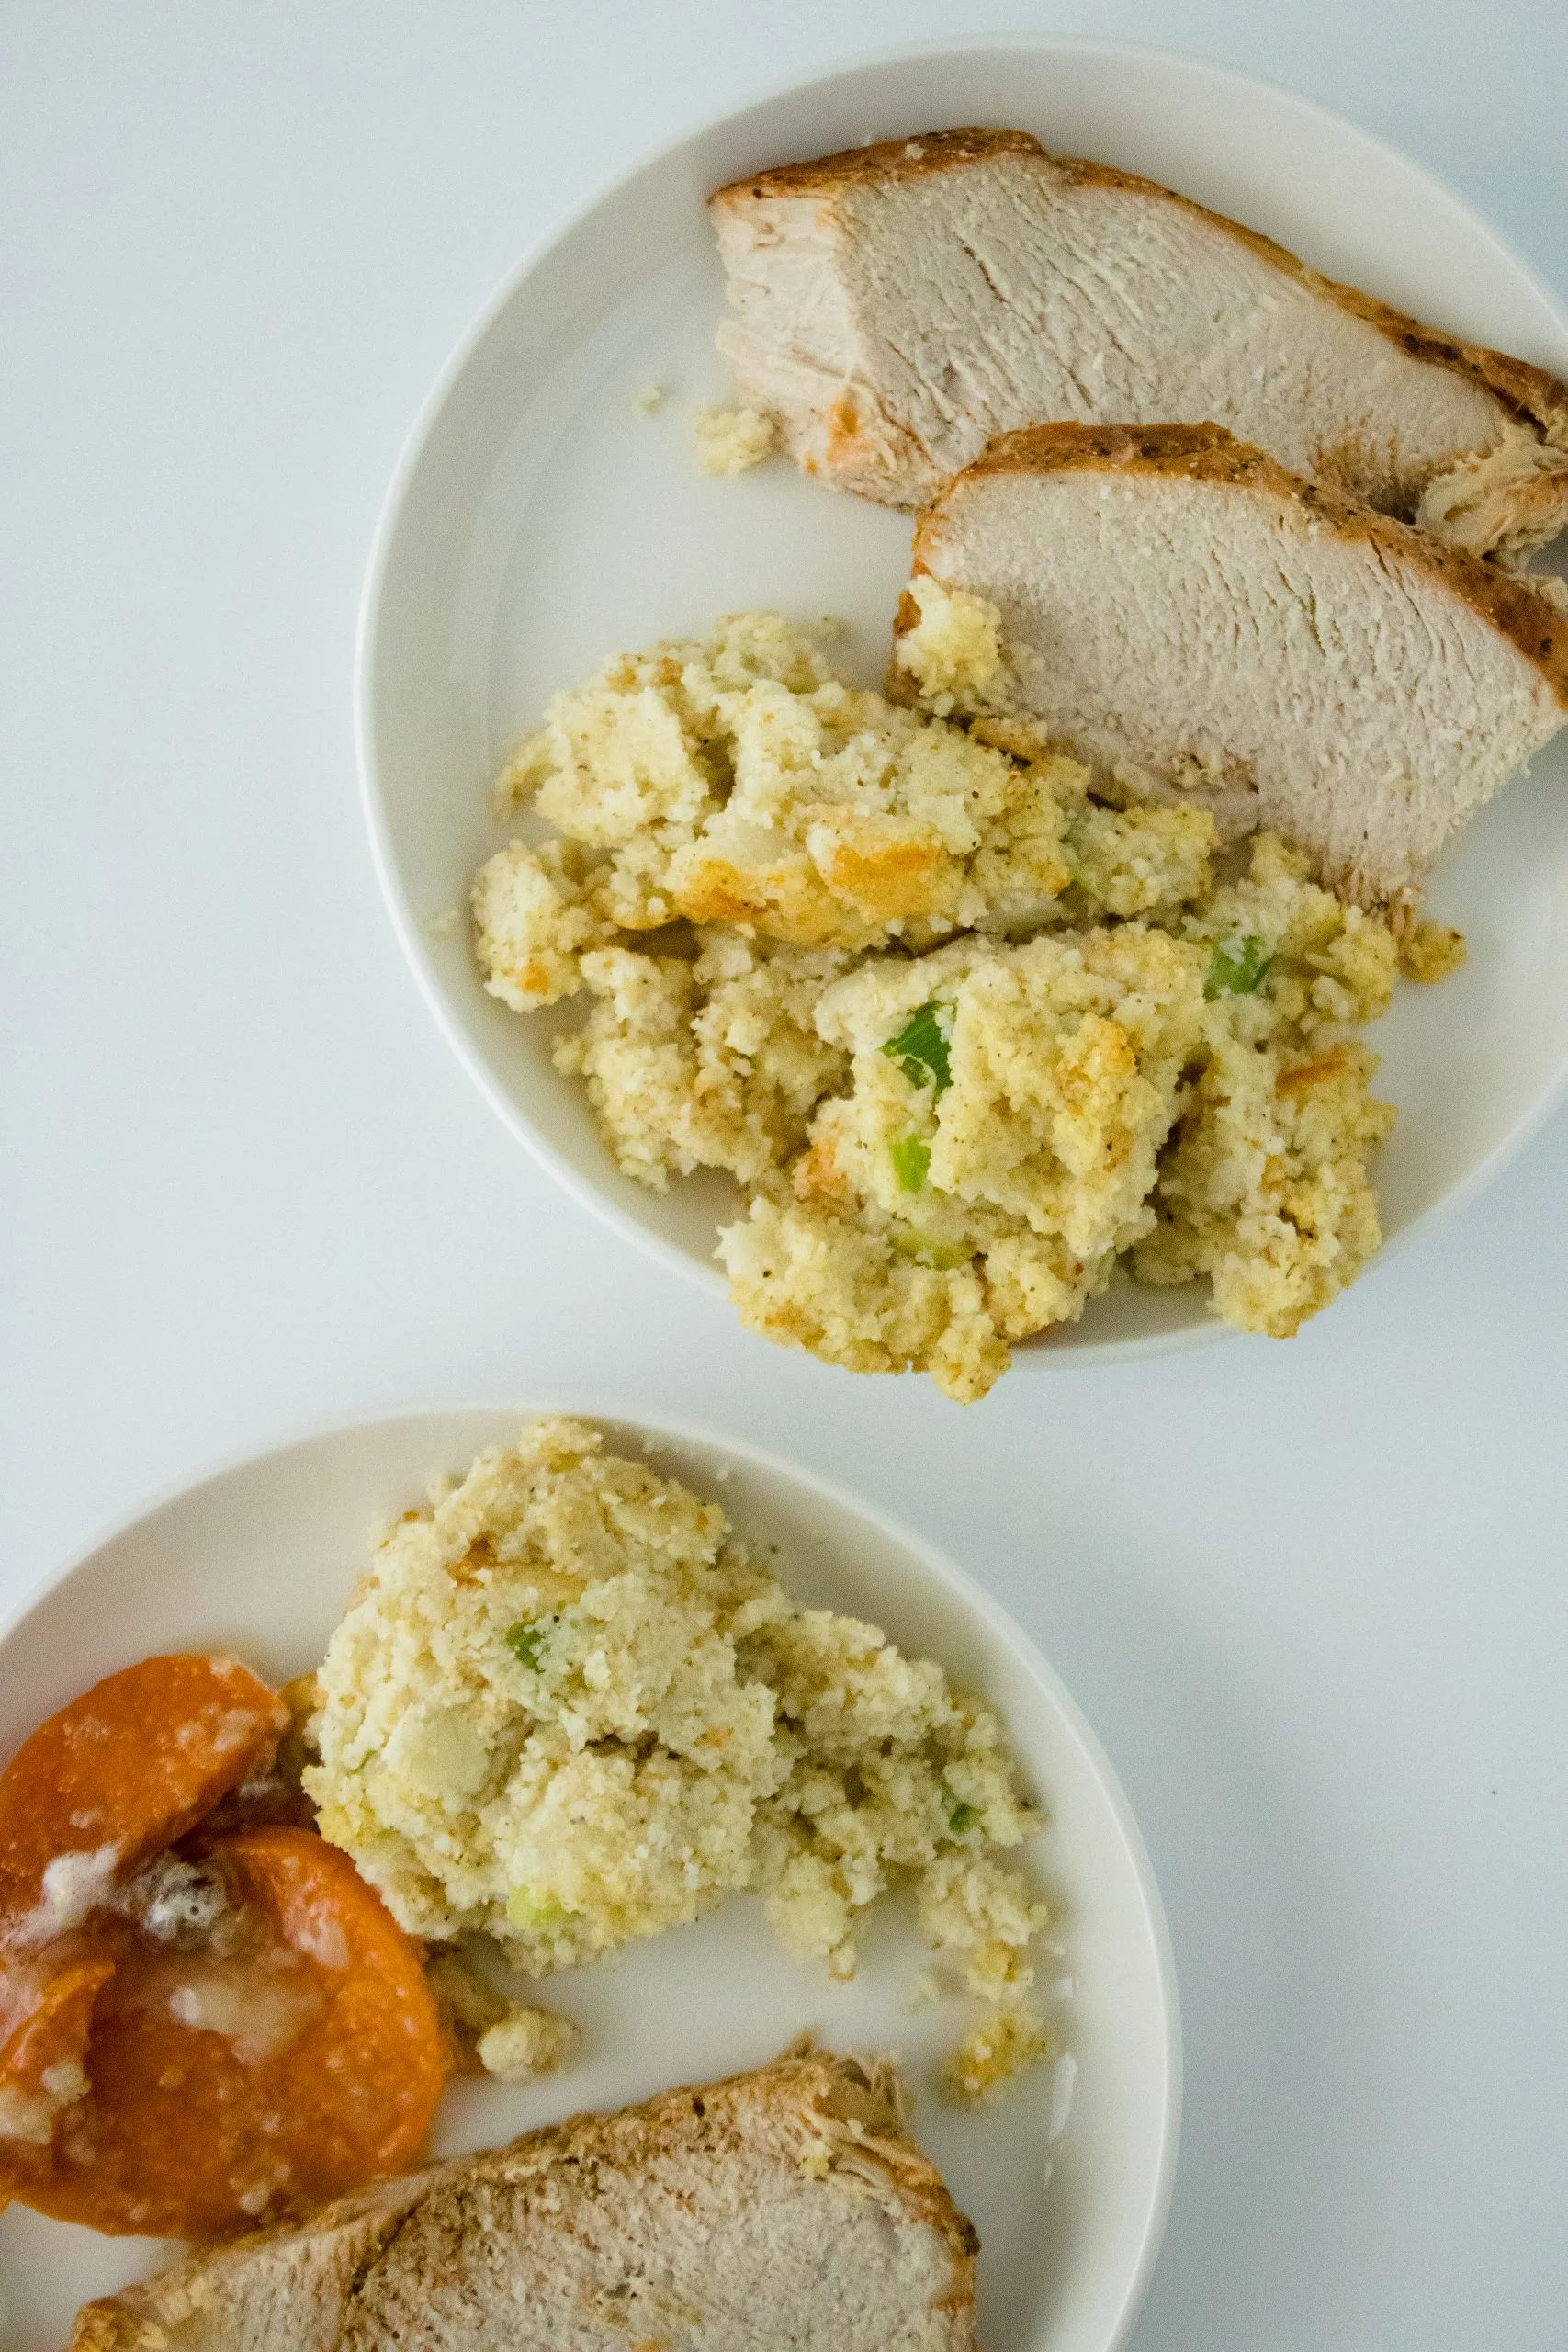 Classic Thanksgiving meal with turkey and cornbread dressing on a plate.